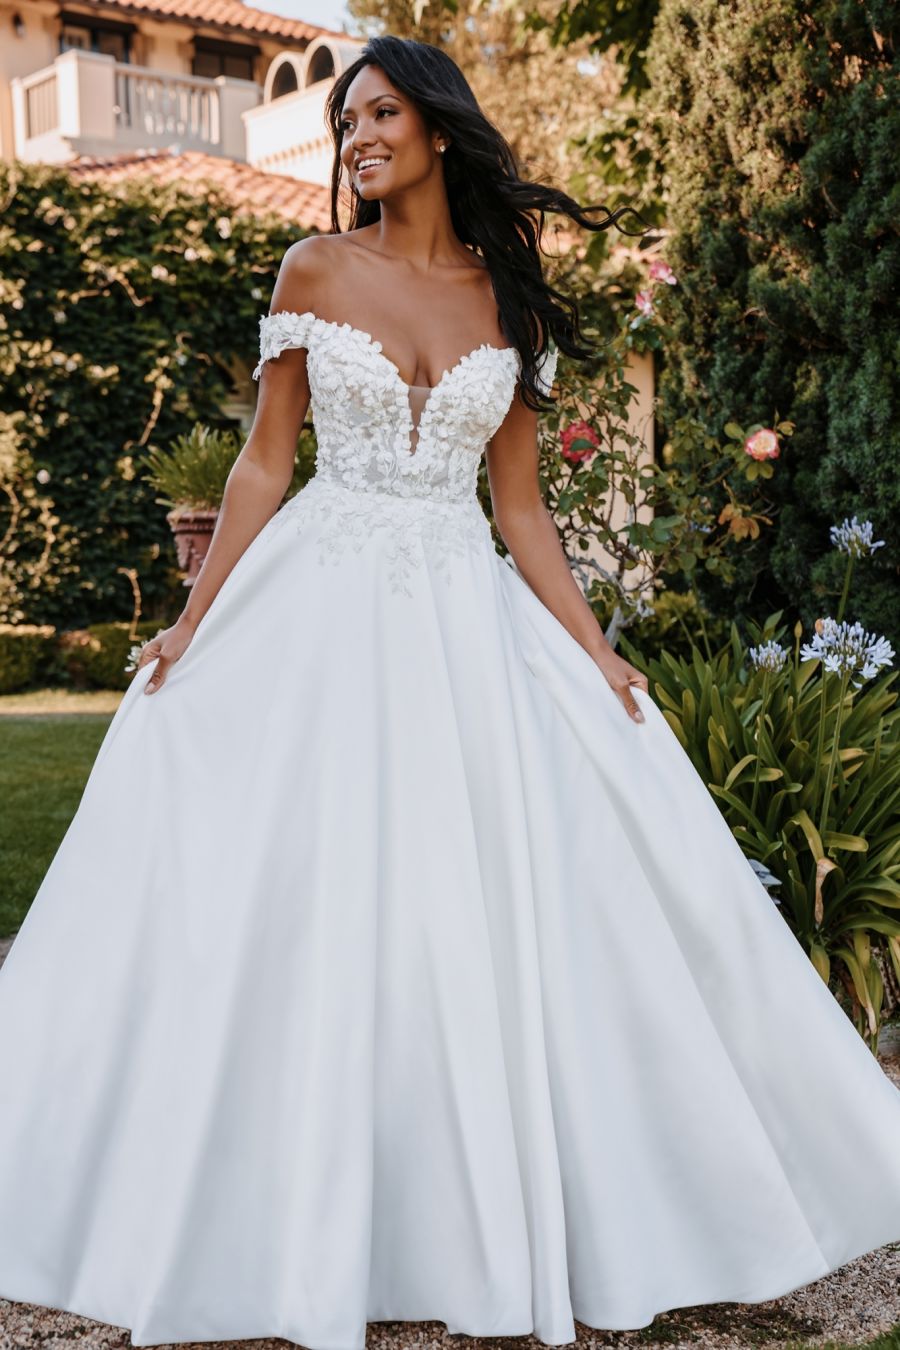 Off The Shoulder Sweetheart Neckline Satin Ball Gown Wedding Dress With Textured Bodice 8075